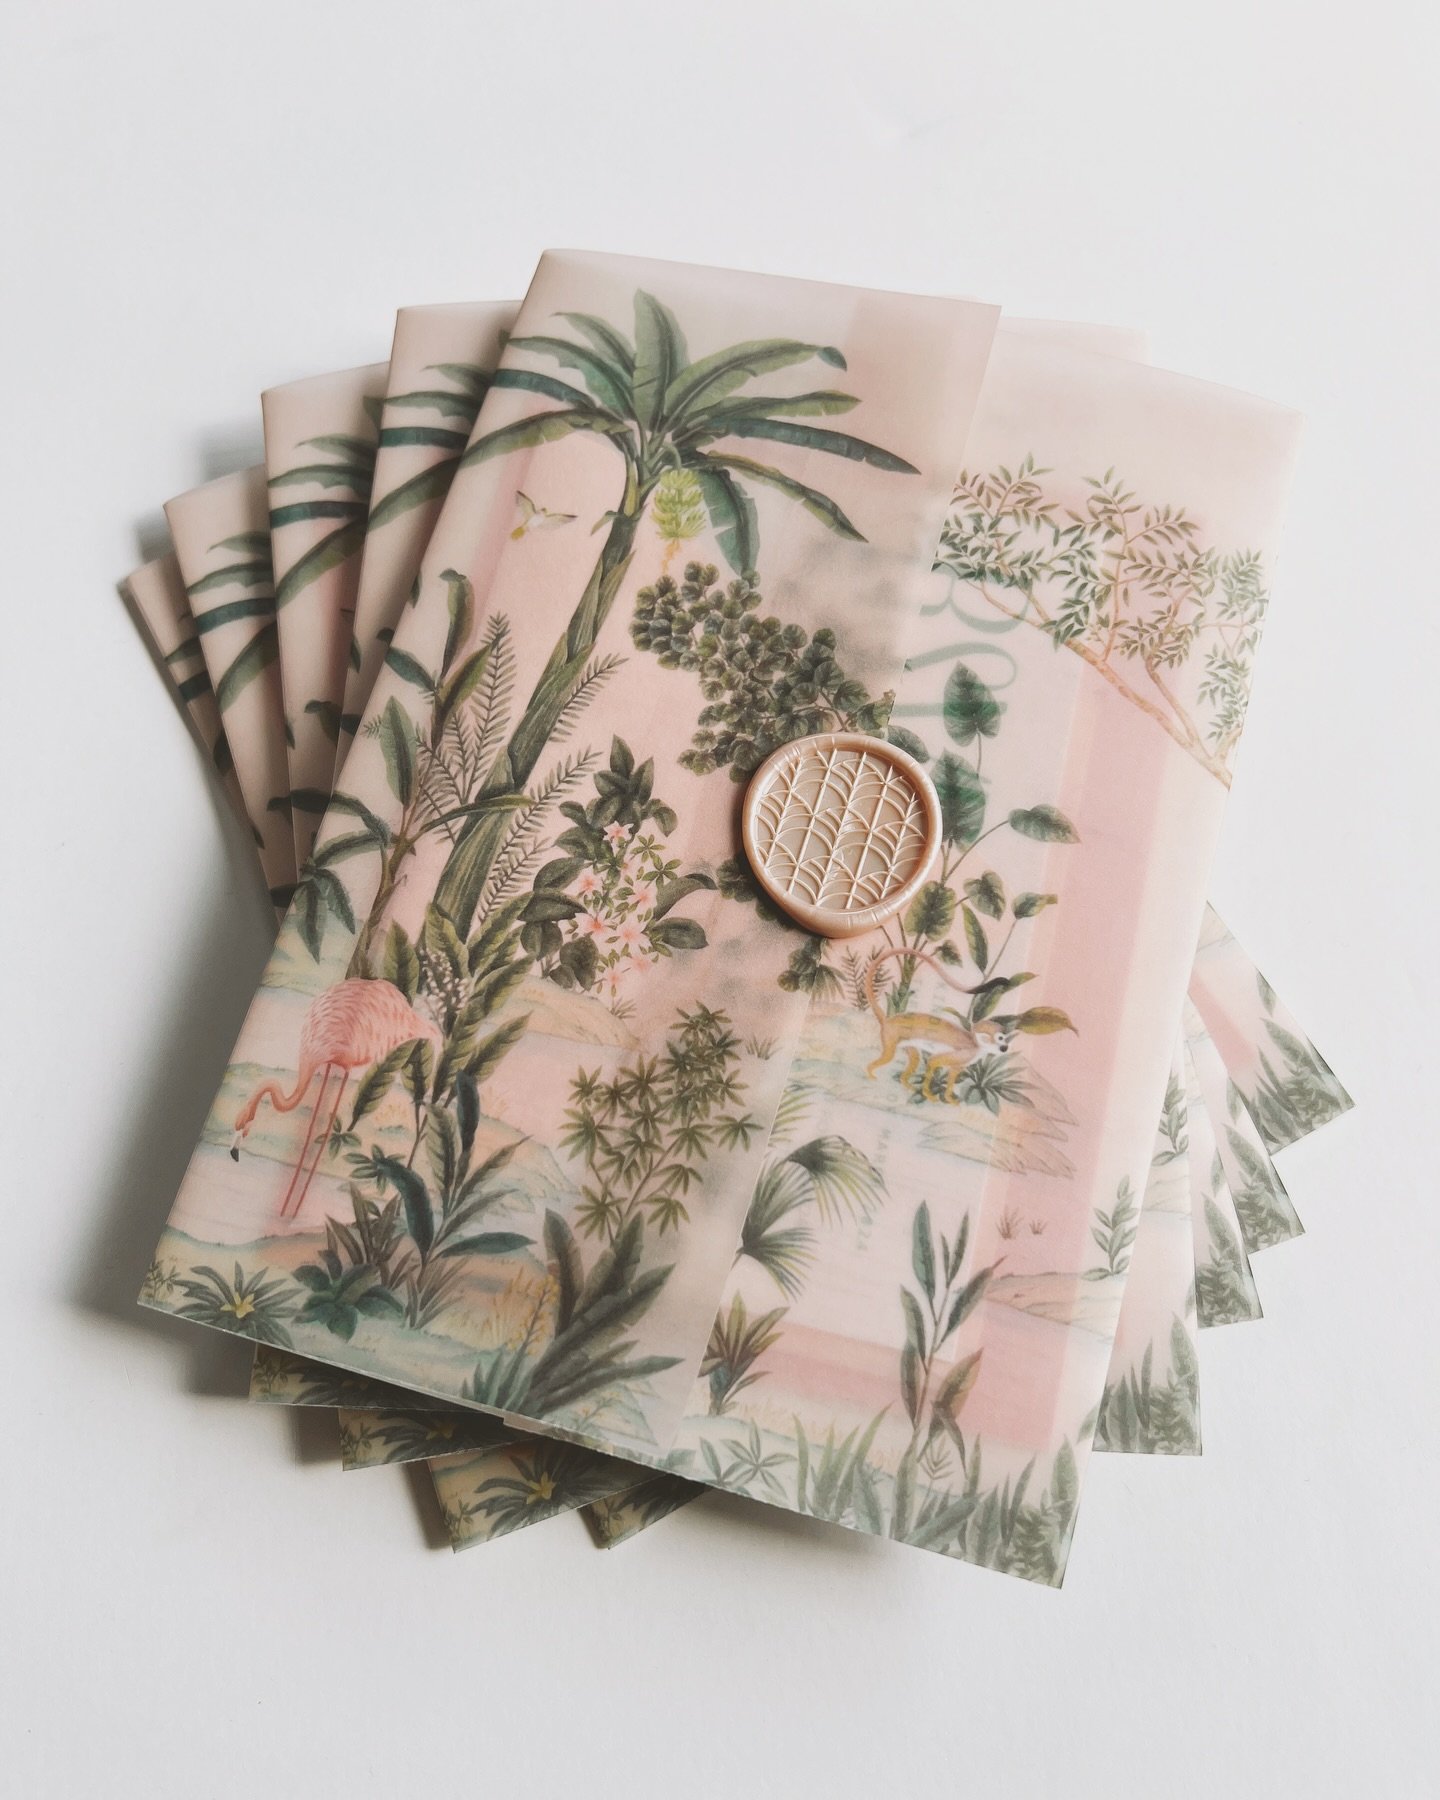 Palm Beach Chic vellum wraps for A&amp;D's wedding invitations with @_calicurated_ 

#weddinginvitations #weddinginspiration #springwedding #velluminvitation #invitationdesign #stationerydesign #palmbeachchic